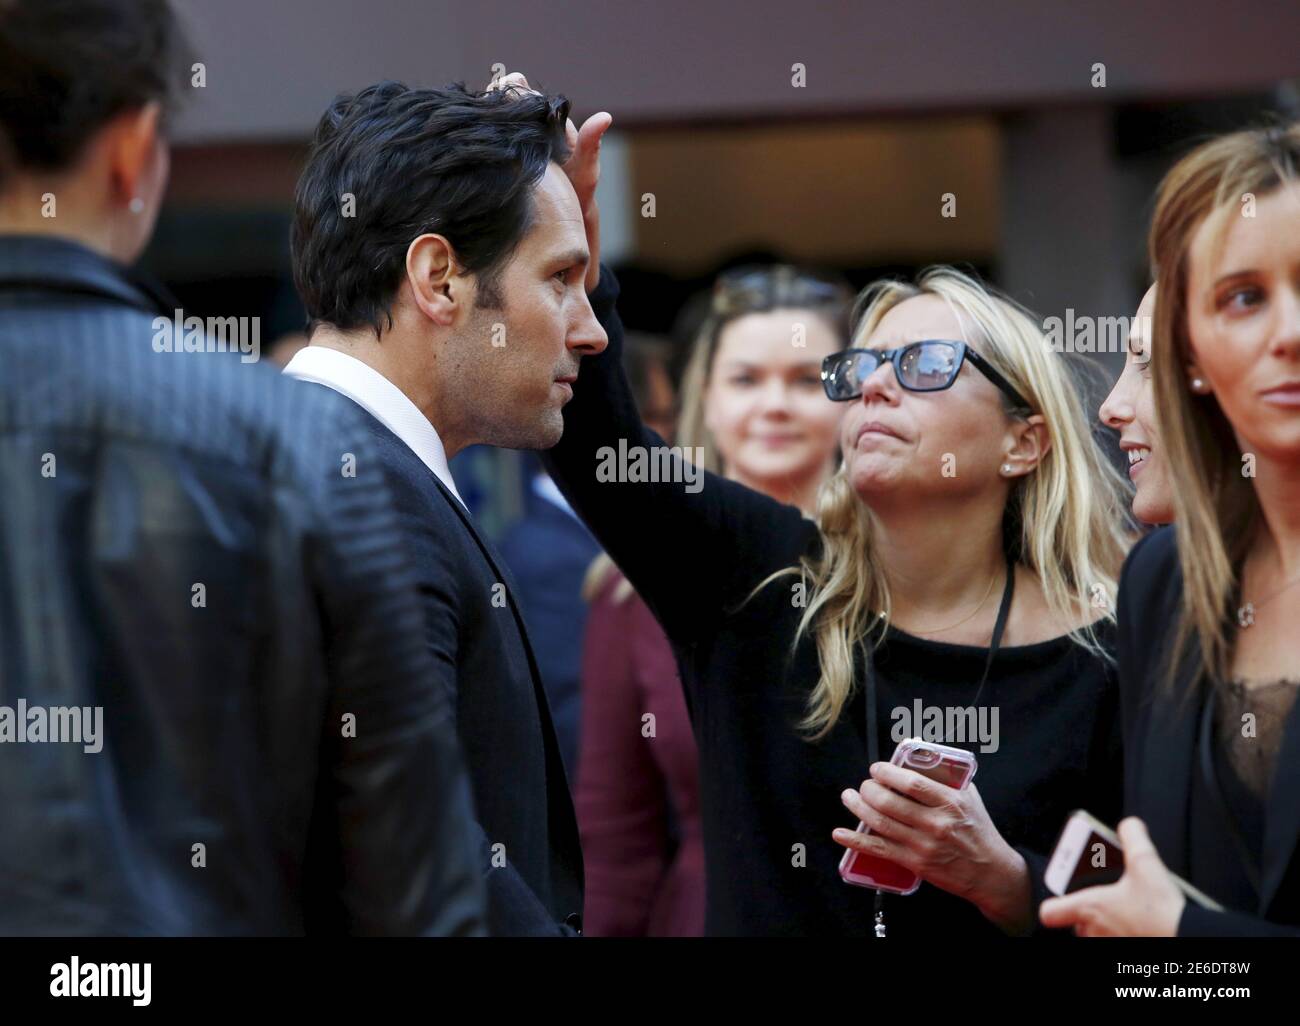 Actor Paul Rudd has someone adjust his hair as he arrives for the European  premiere of 